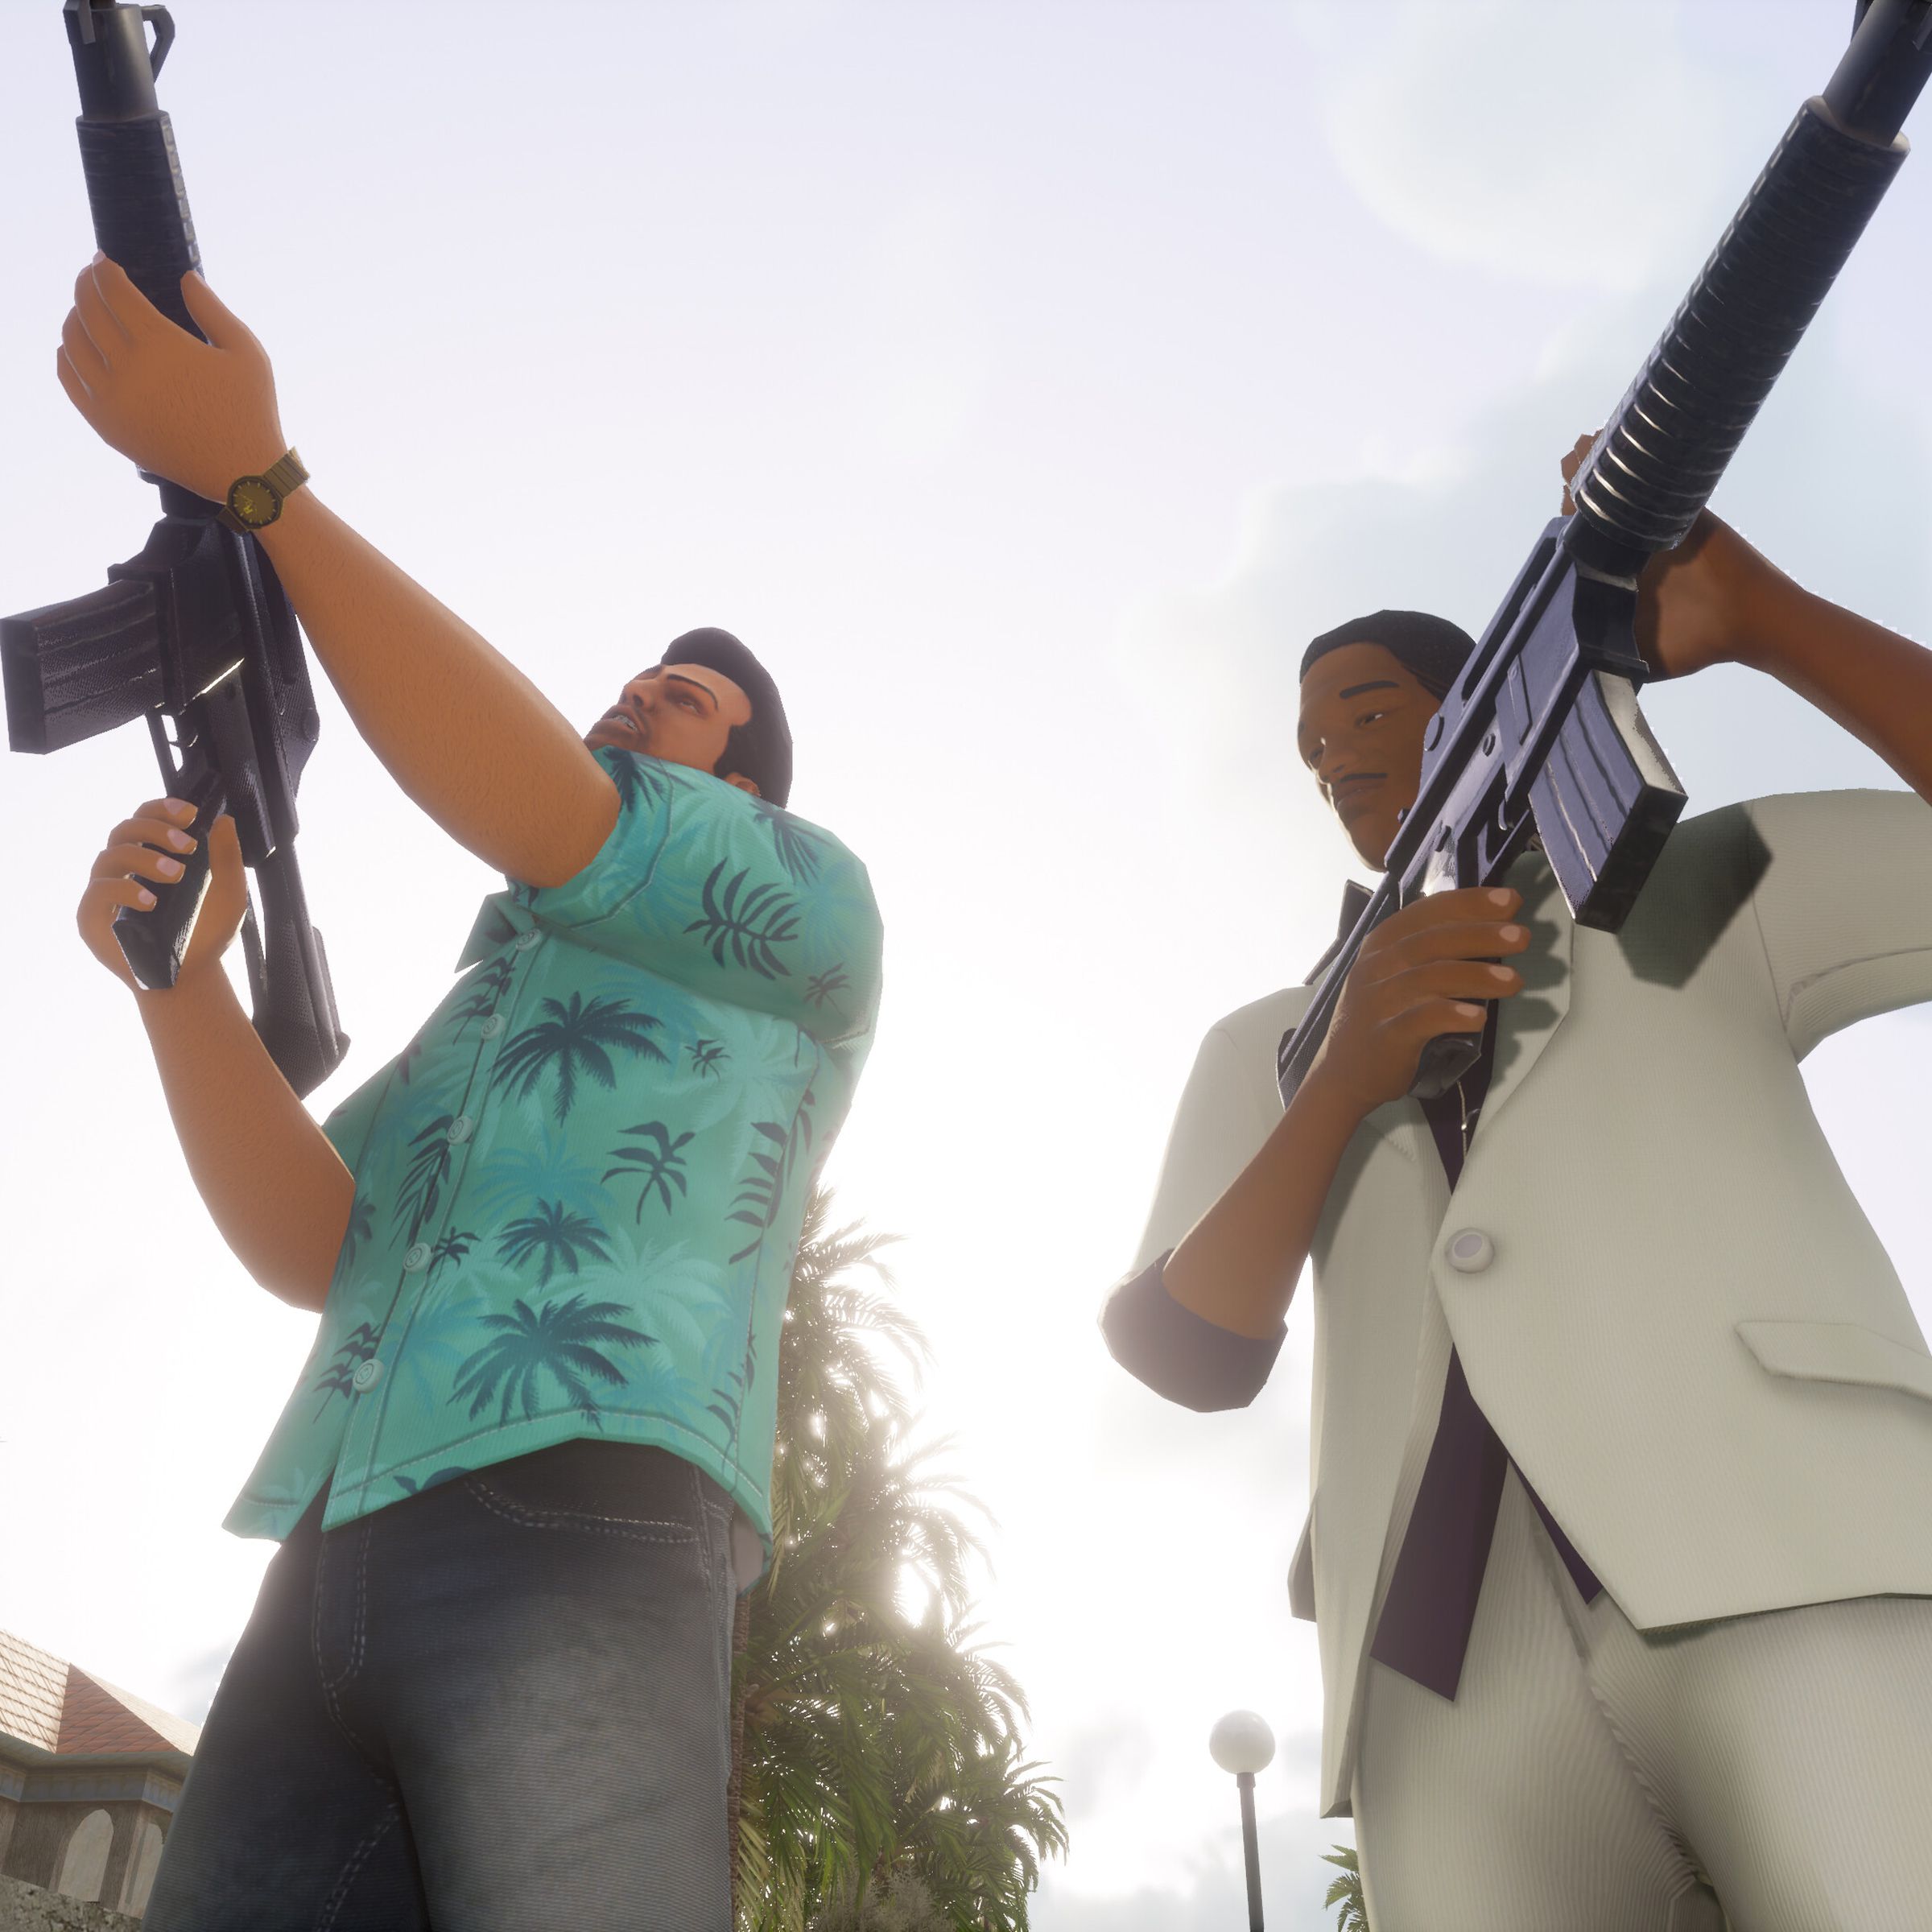 A screenshot from the video game Grand Theft Auto: Vice City.